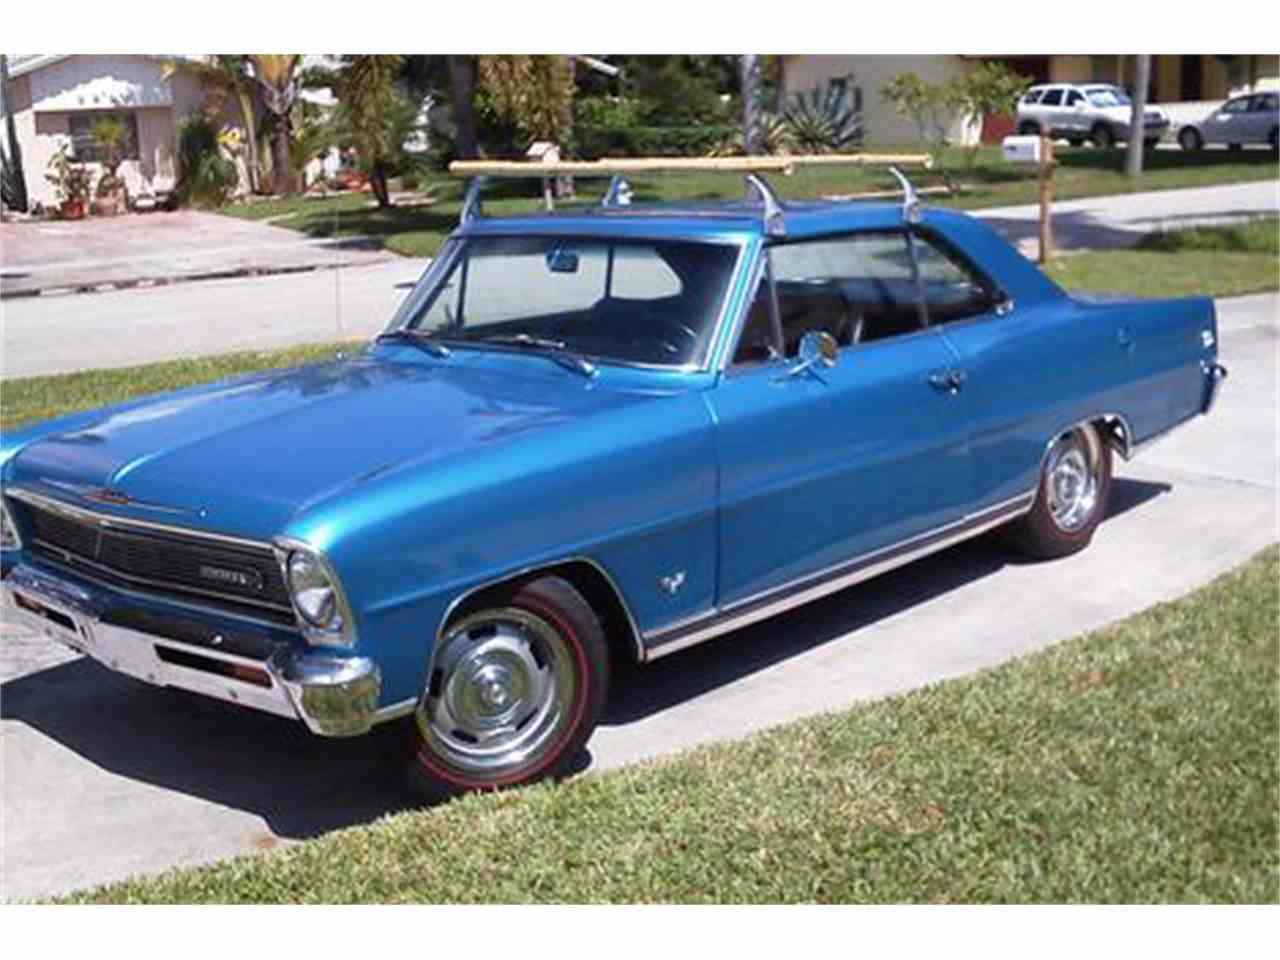 Amazing Chevrolet Nova Ss Pictures & Backgrounds